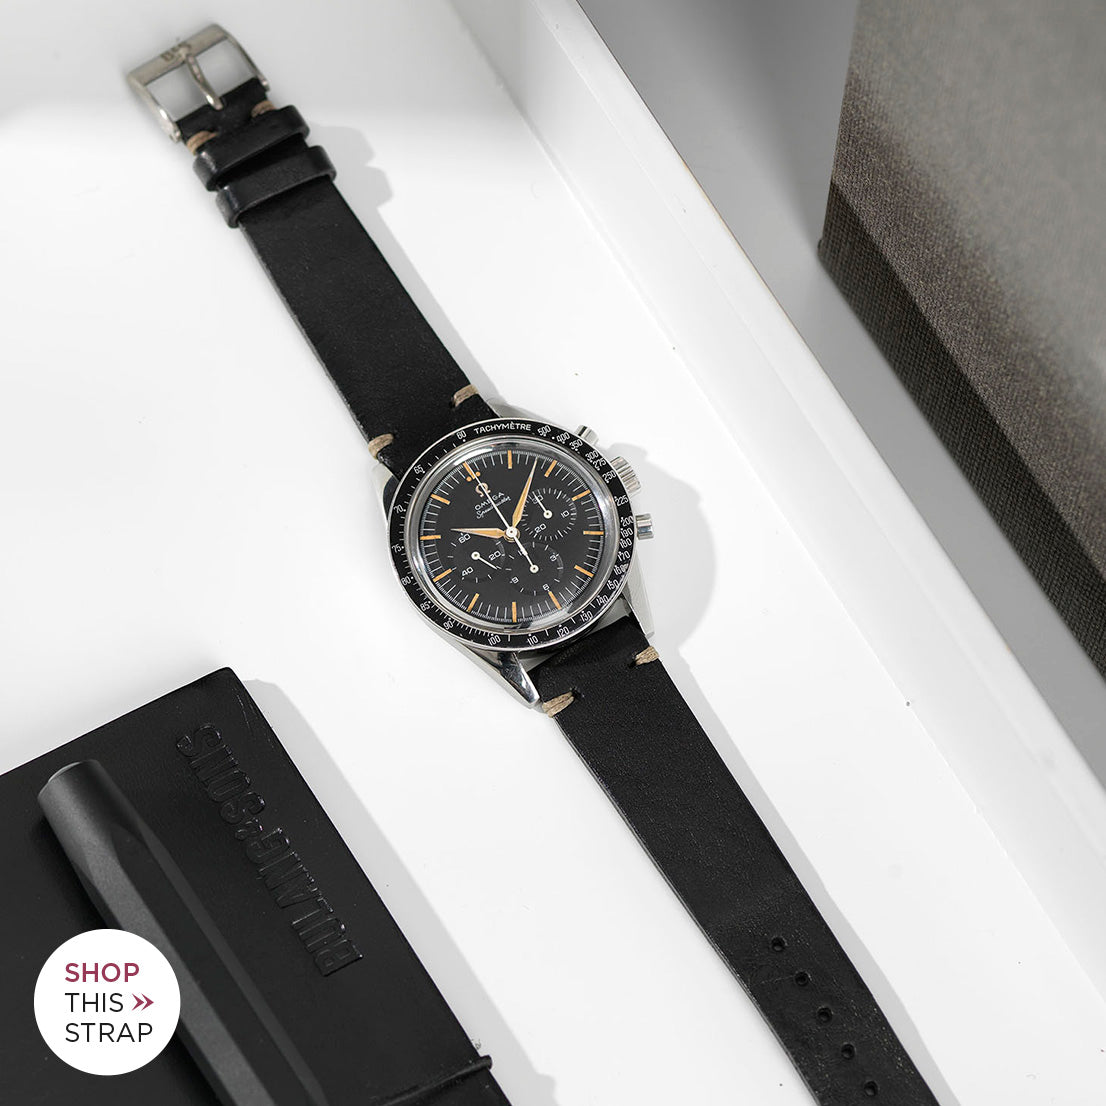 Bulang and Sons_Strap Guide_The Omega Straight Lugs speedmaster_Black Leather Watch Strap